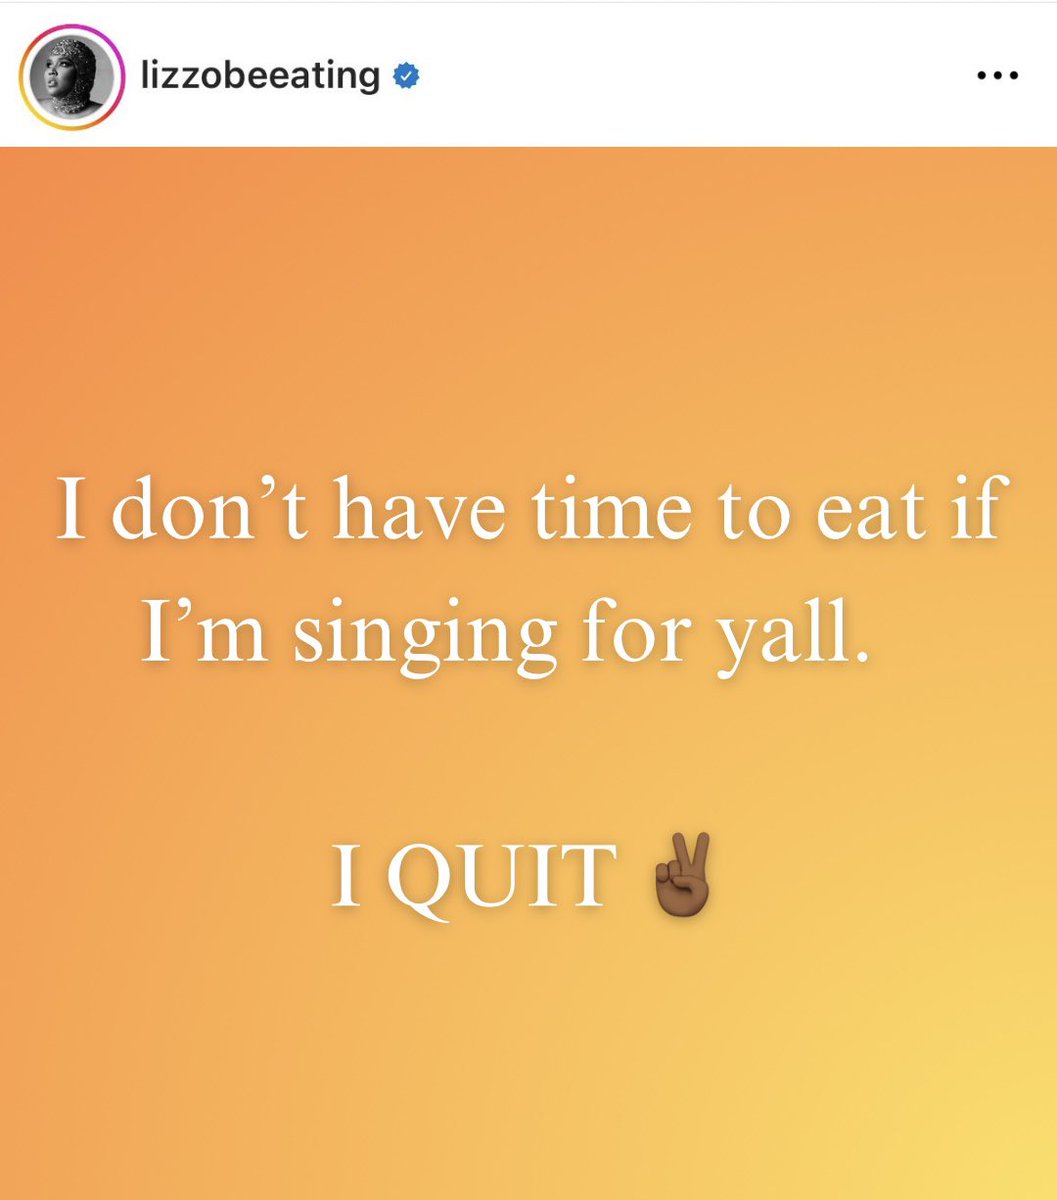 Lizzo announces that she is quitting music via heartbreaking new Instagram post.